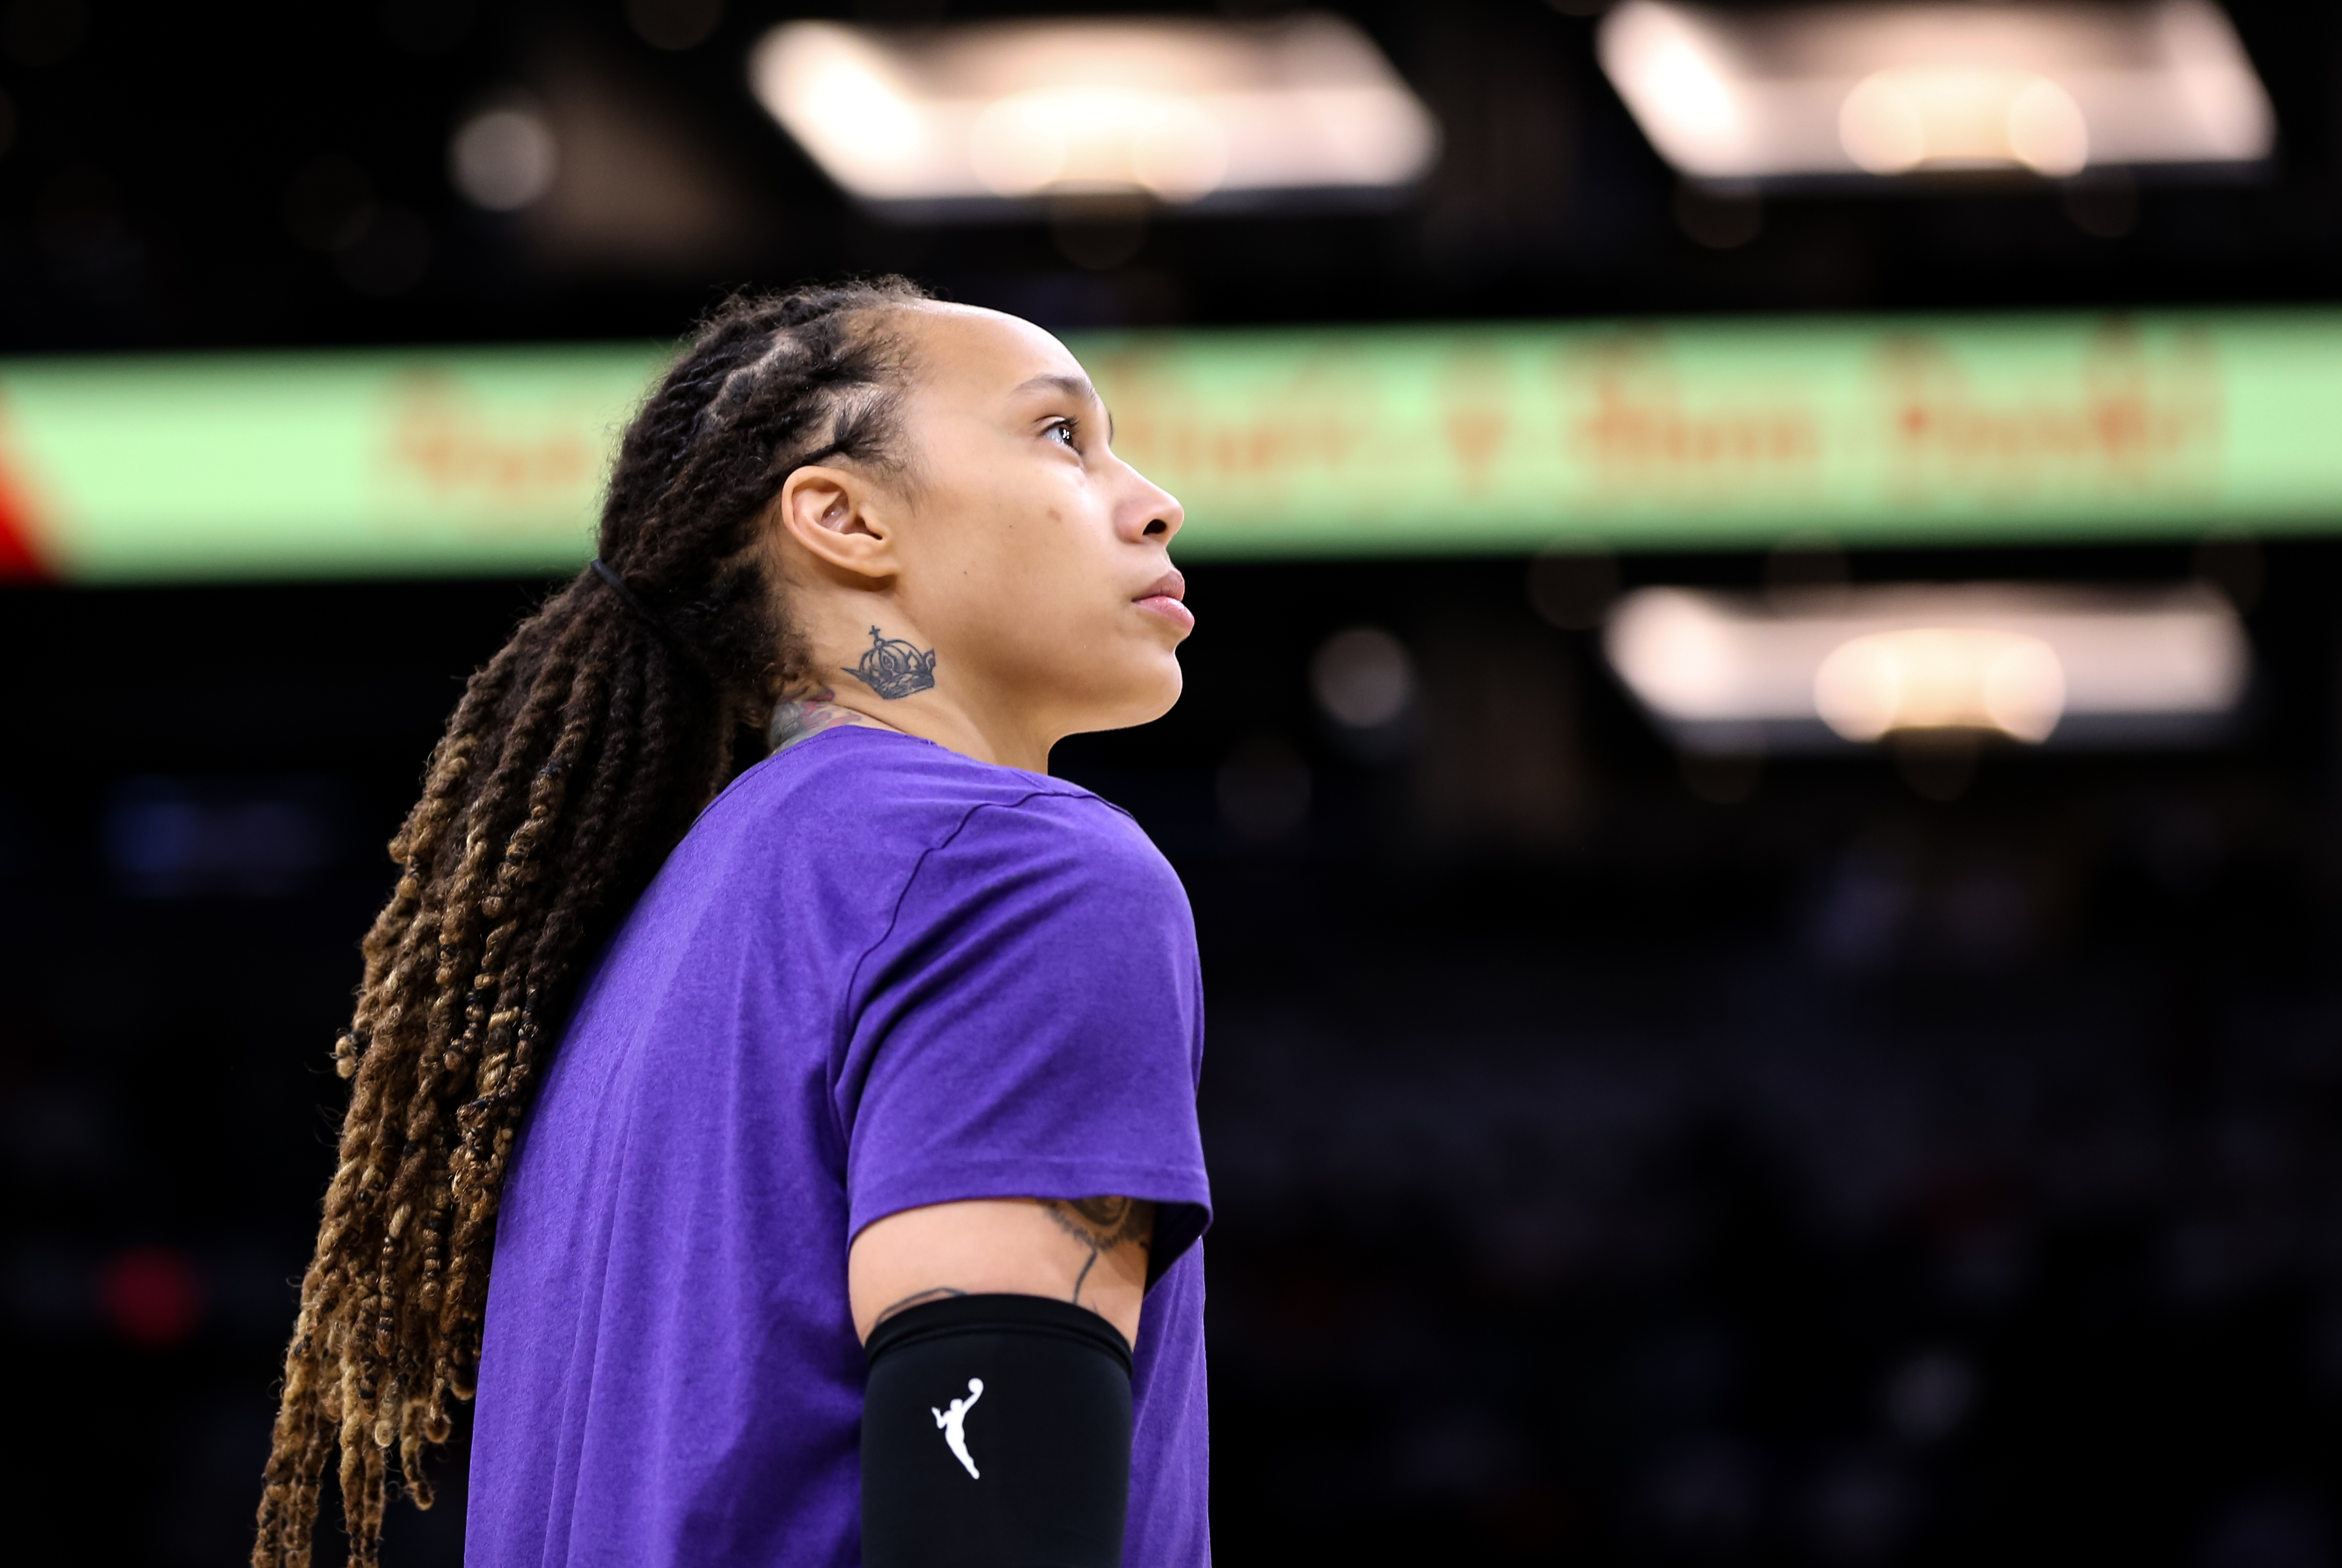 Brittney Griner was playing in Russia when Vladimir Putin launched his invasion of Ukraine